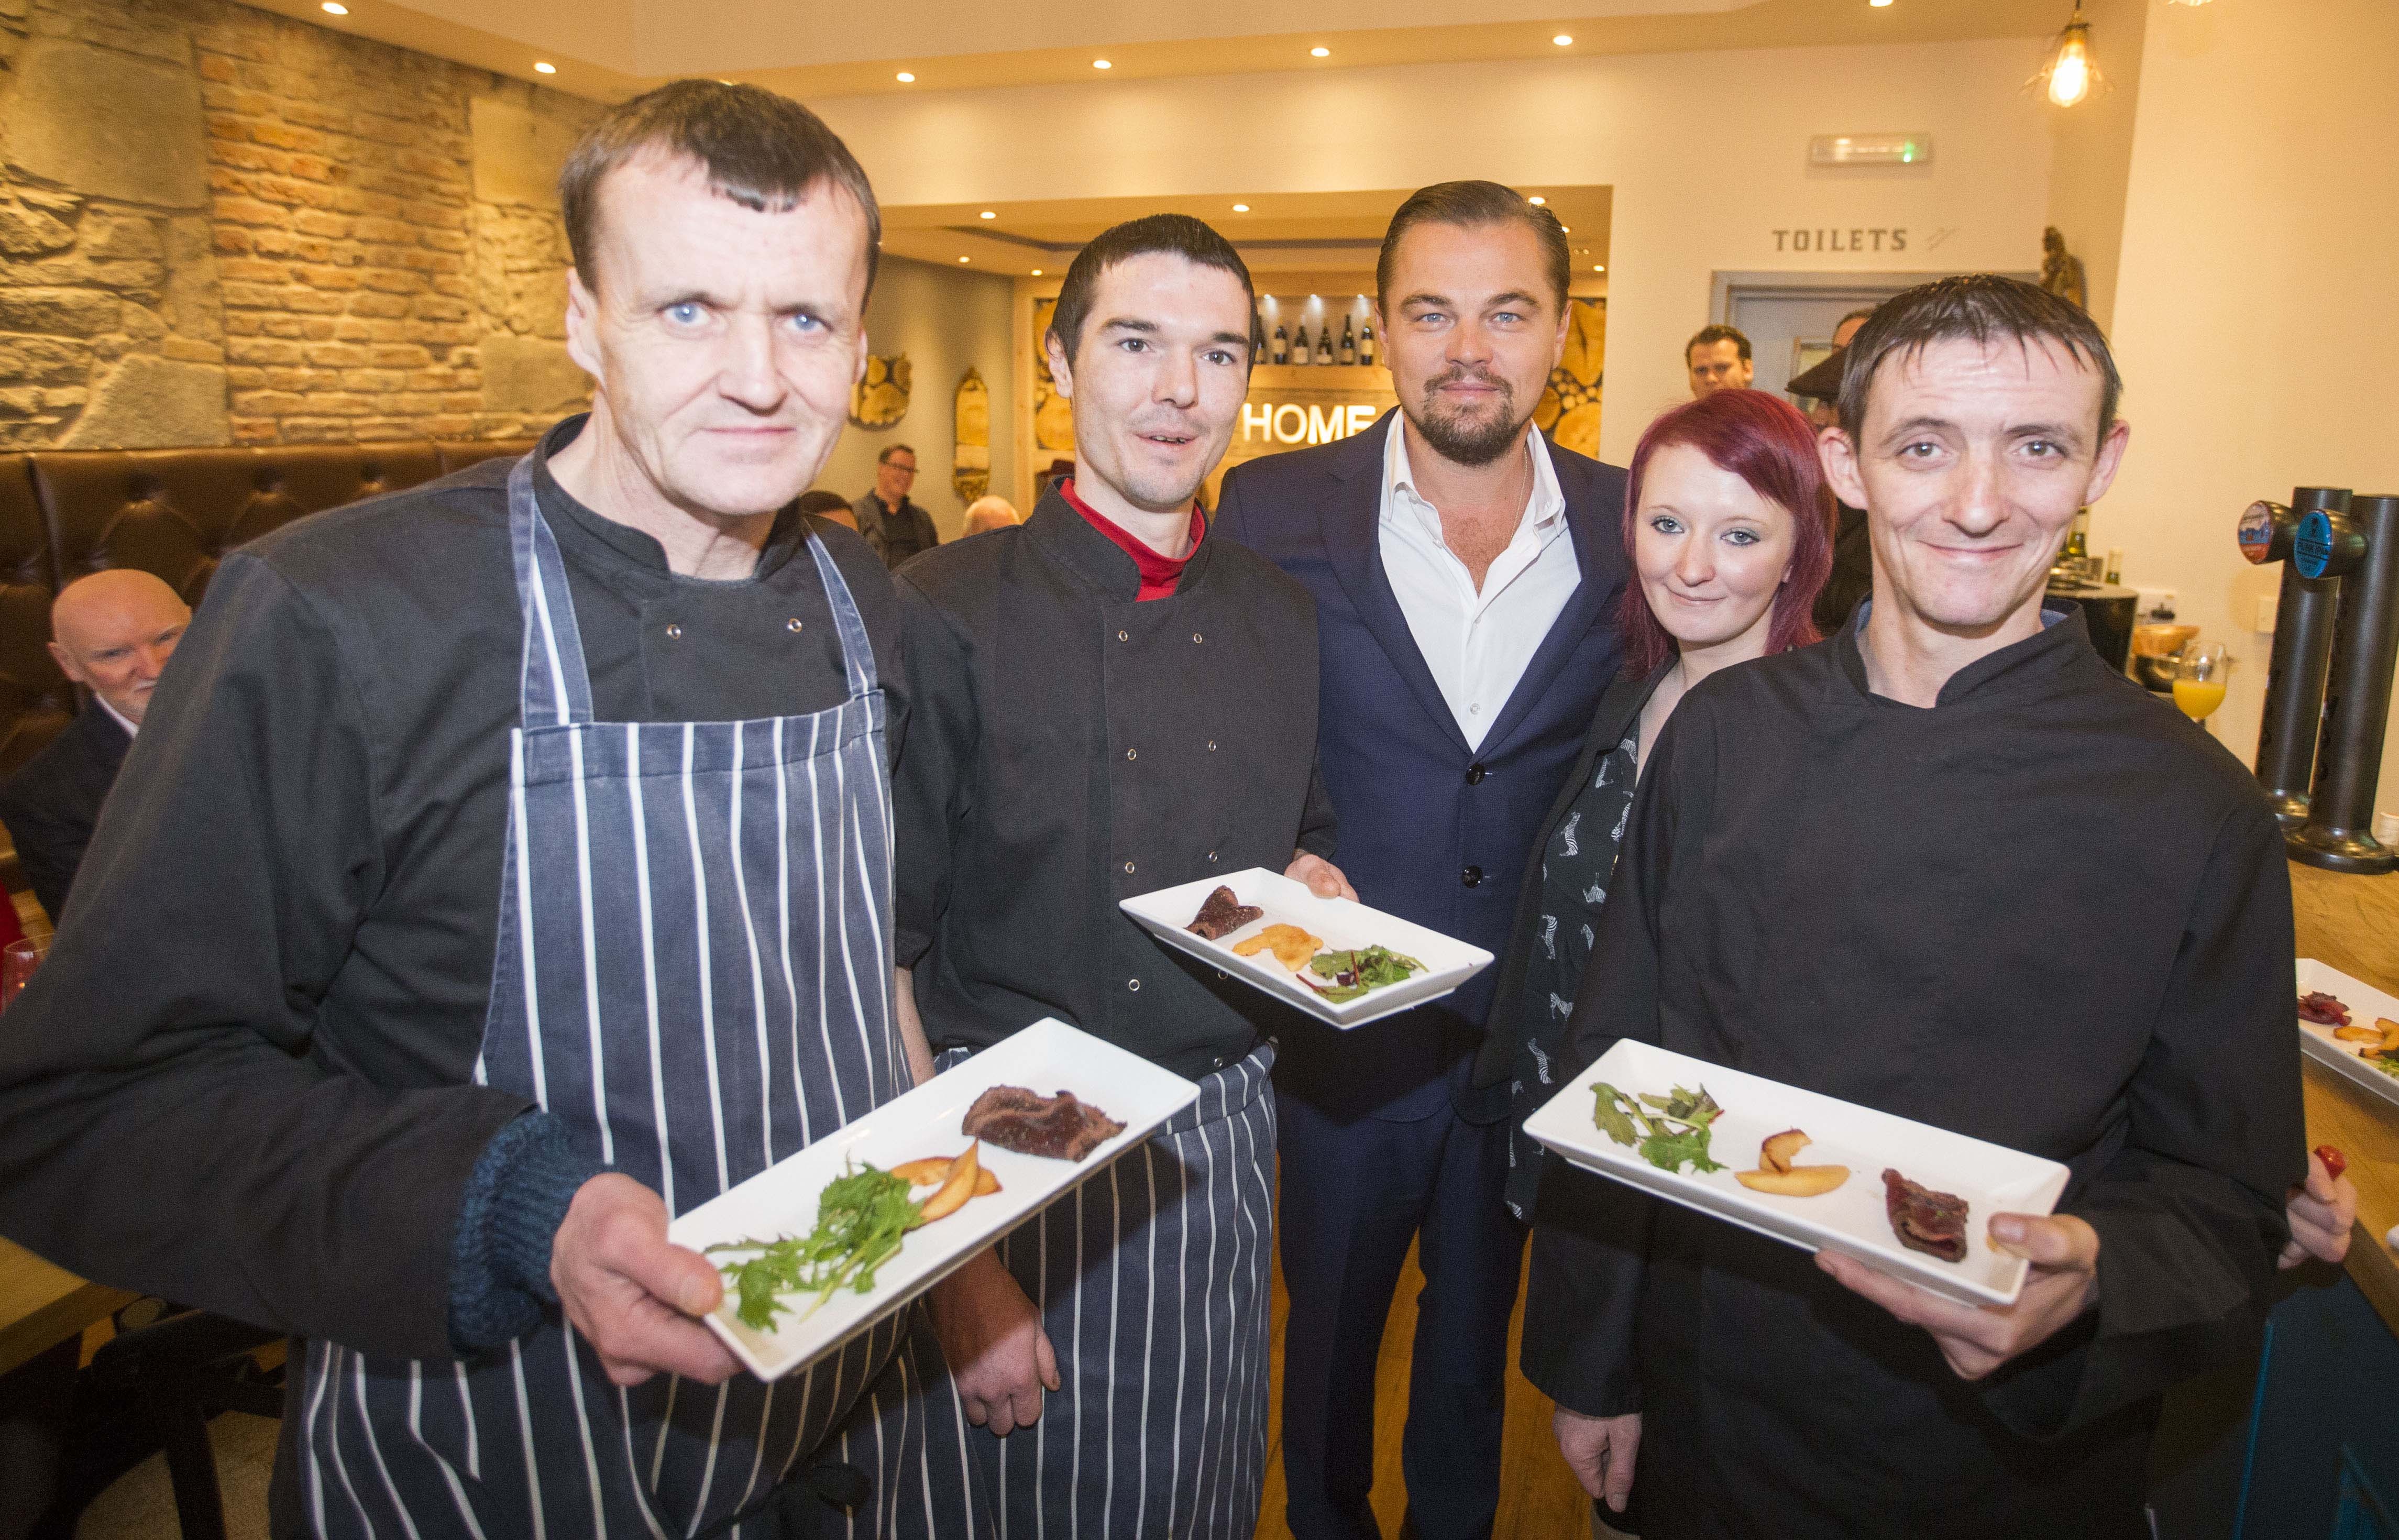 Hollywood actor Leonardo DiCaprio poses with formerly homeless staff (left to right) Colin Childs, Joe Hart, Biffy Mackay and Sonny Murray helped prepare lunch for DiCaprio and guests alongside acclaimed chef and Home co-founder Dean Gassabi (not pictured) at Social Bite restaurant, Home on November 17, 2016 in Edinburgh, Scotland. (Jeff Holmes&mdash;Getty Images)